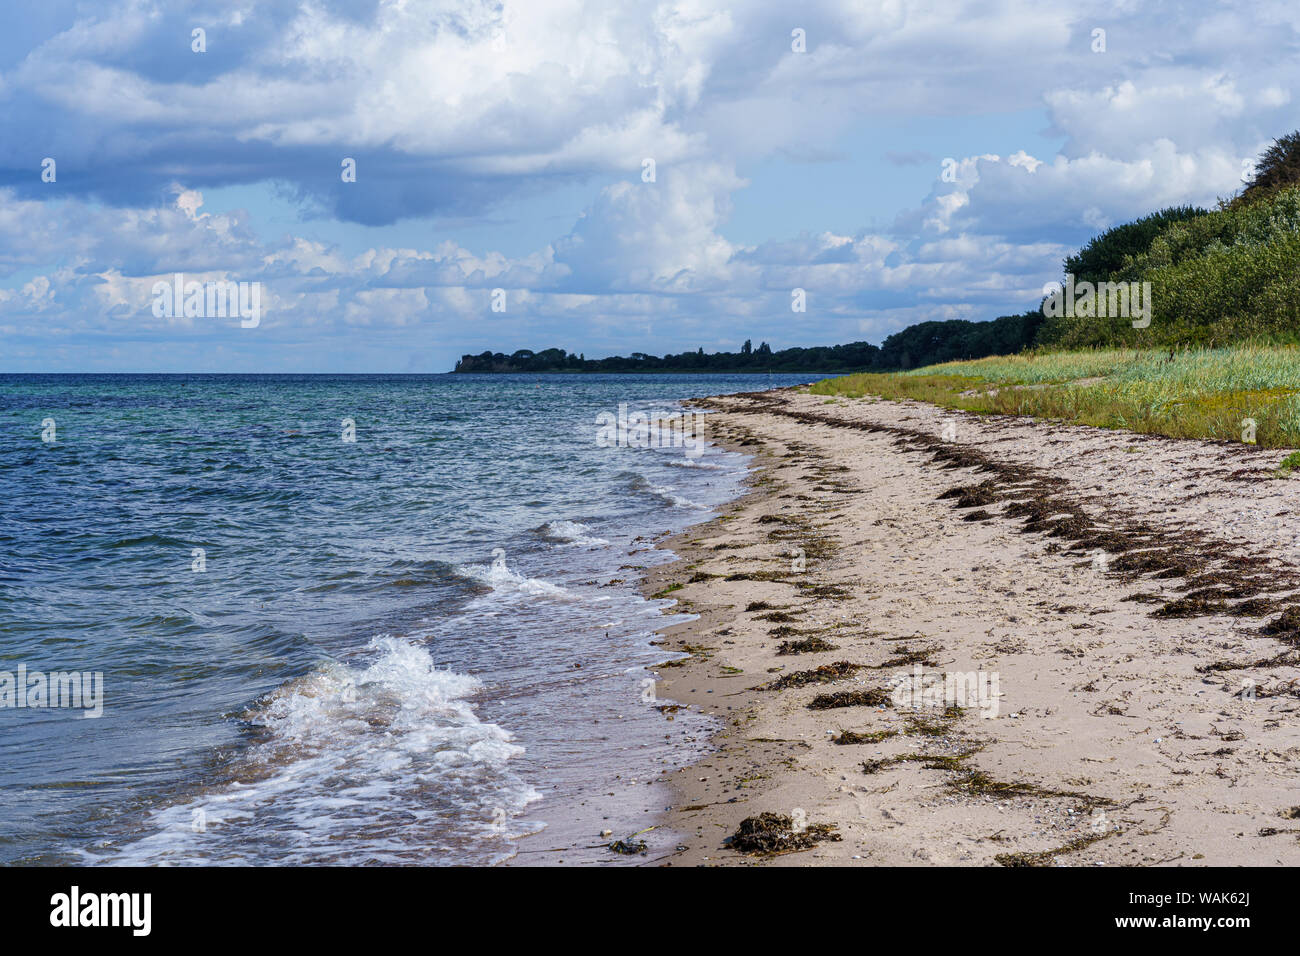 Sandy beach with waves on the Baltic Sea Stock Photo